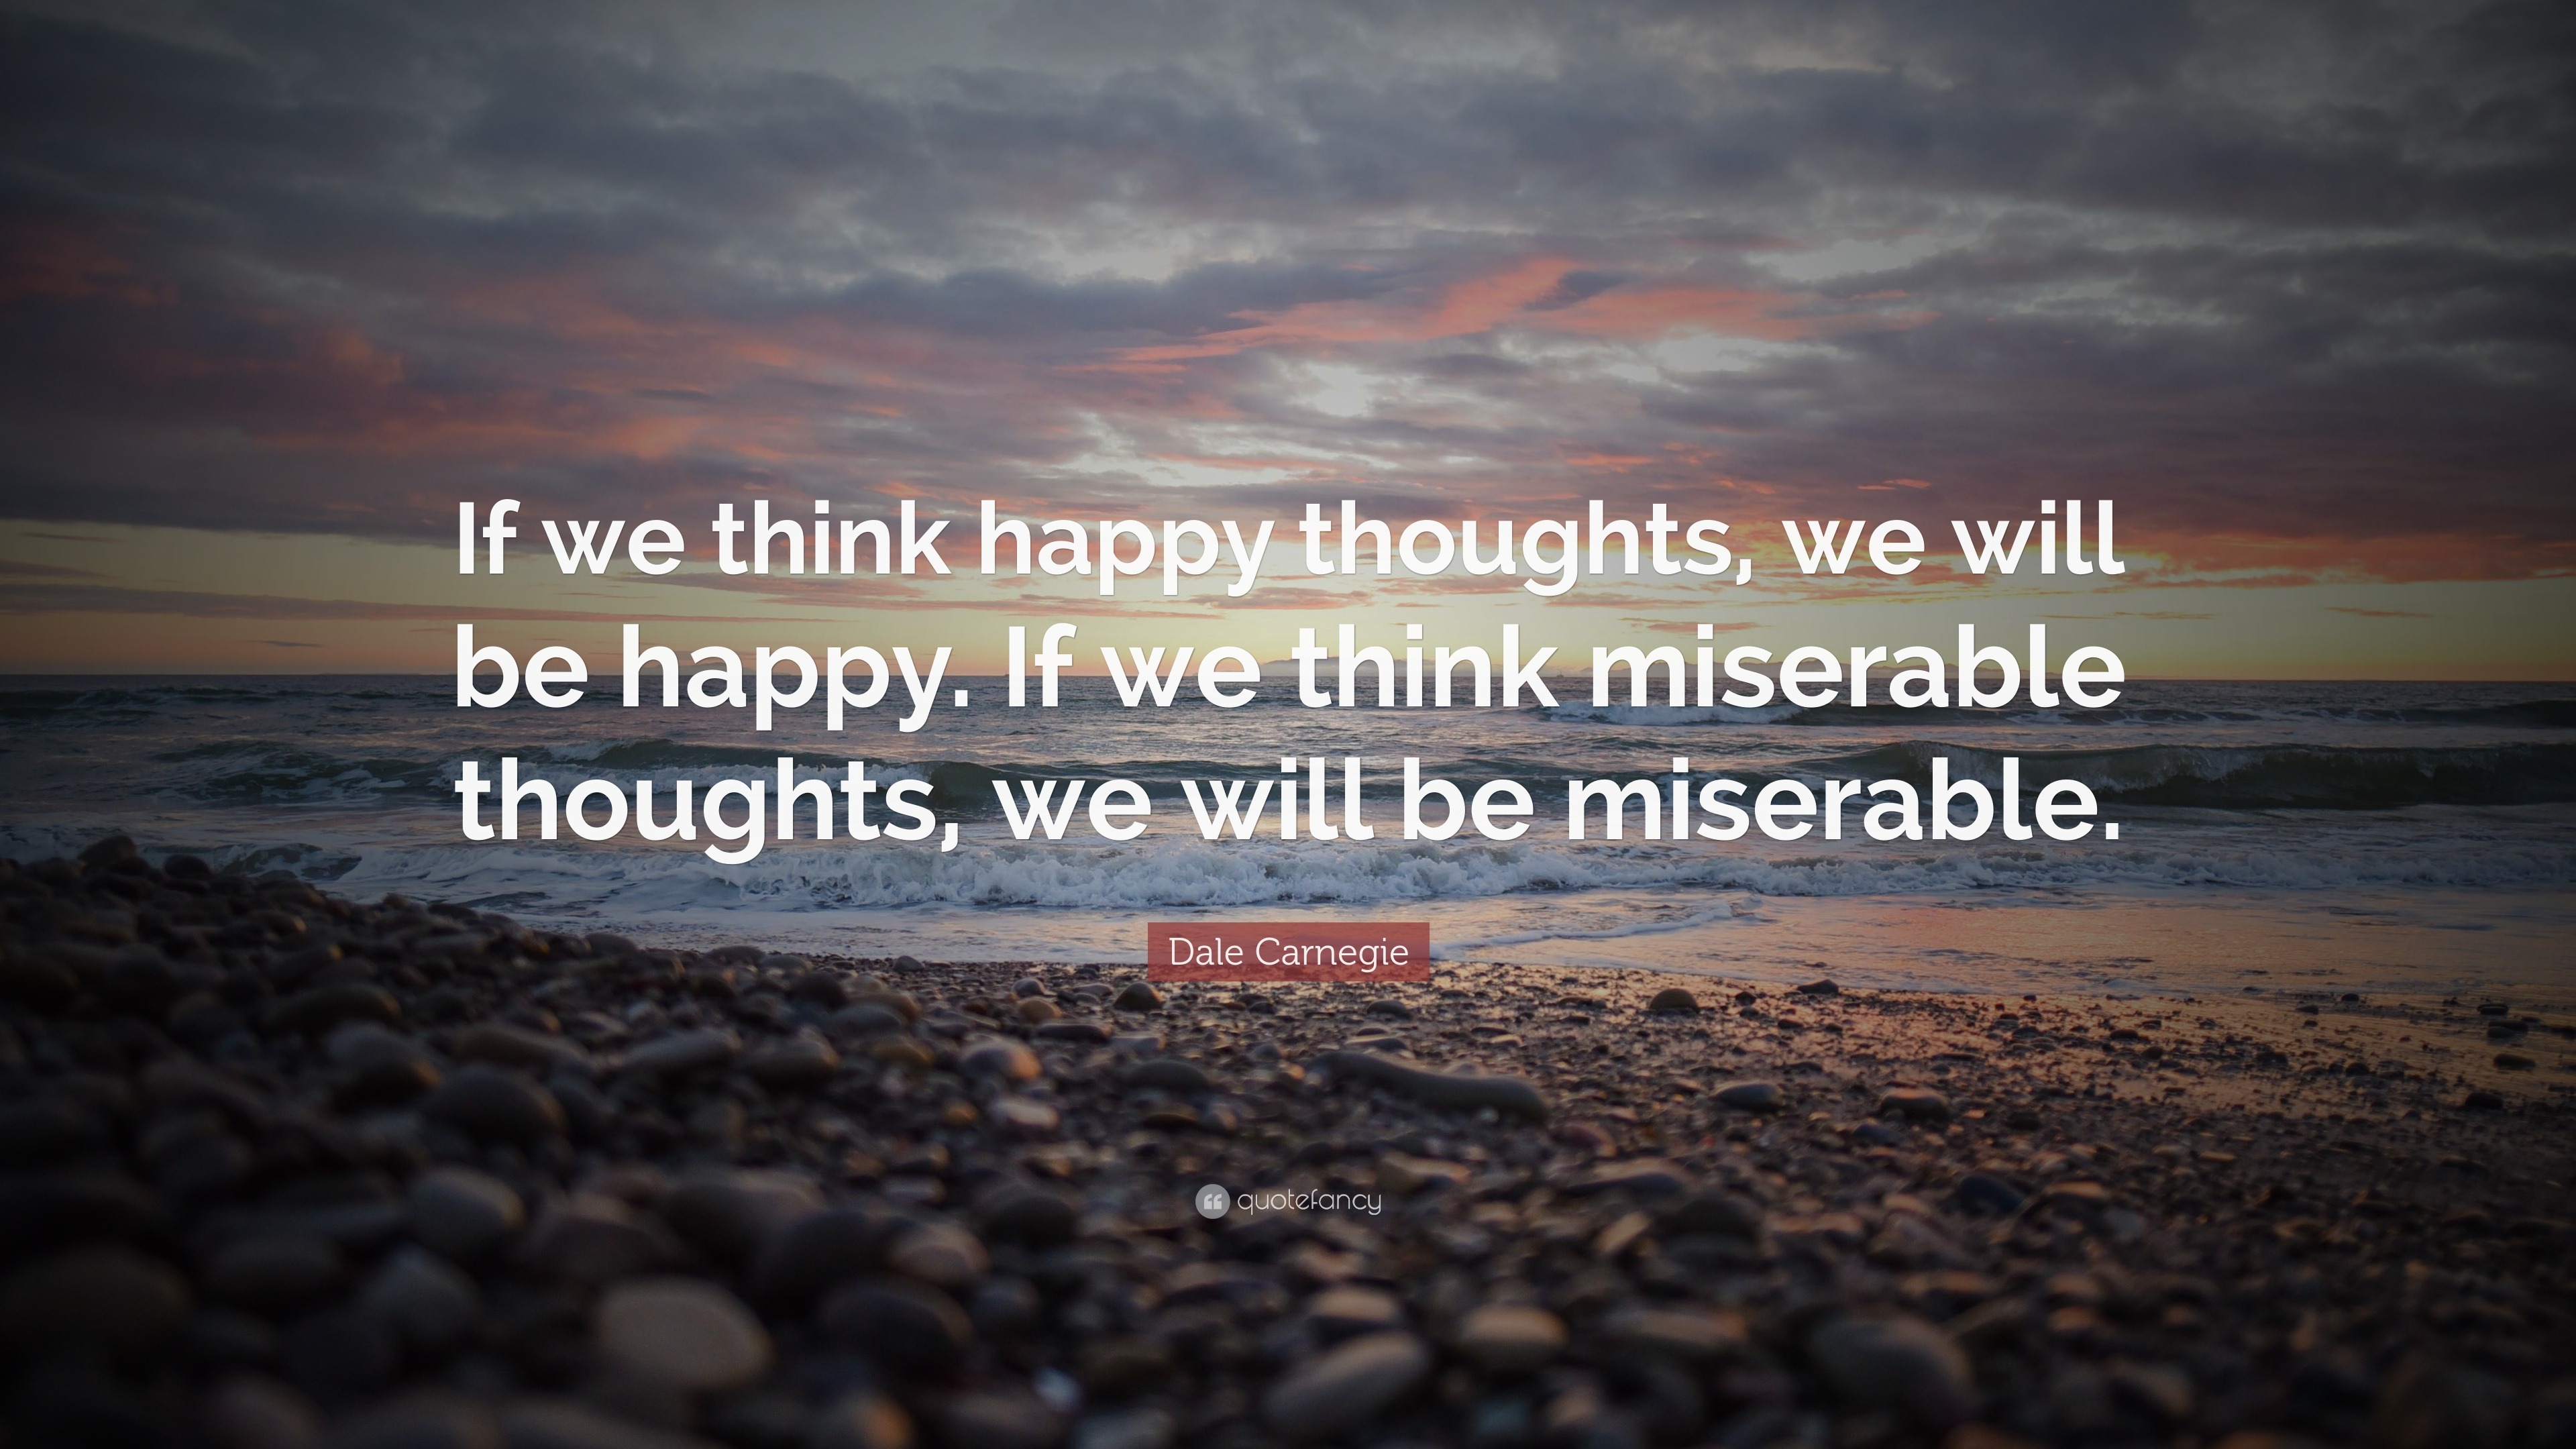 Dale Carnegie Quote: “If we think happy thoughts, we will be happy